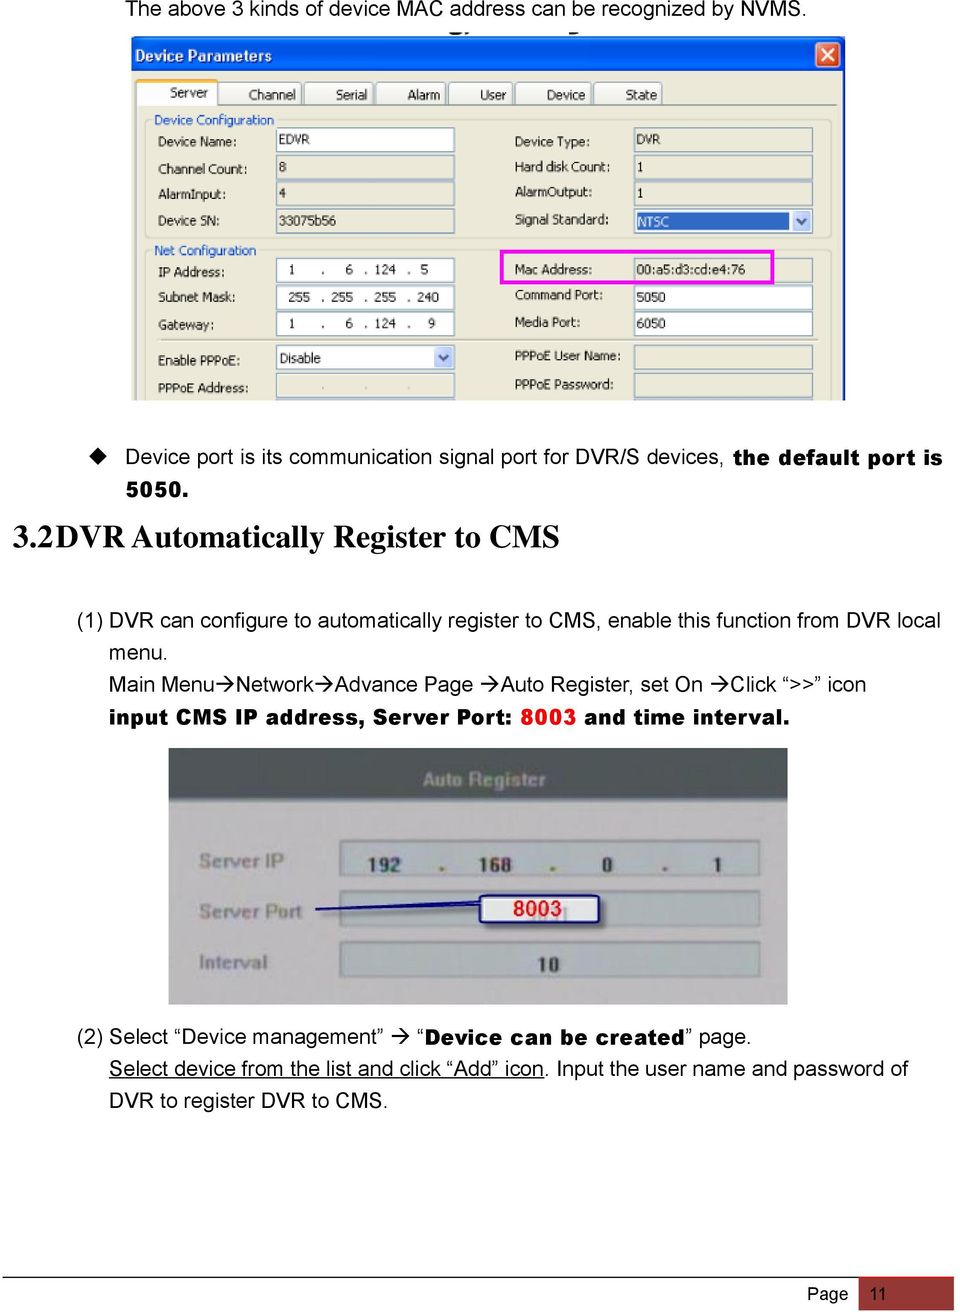 2DVR Automatically Register to CMS (1) DVR can configure to automatically register to CMS, enable this function from DVR local menu.